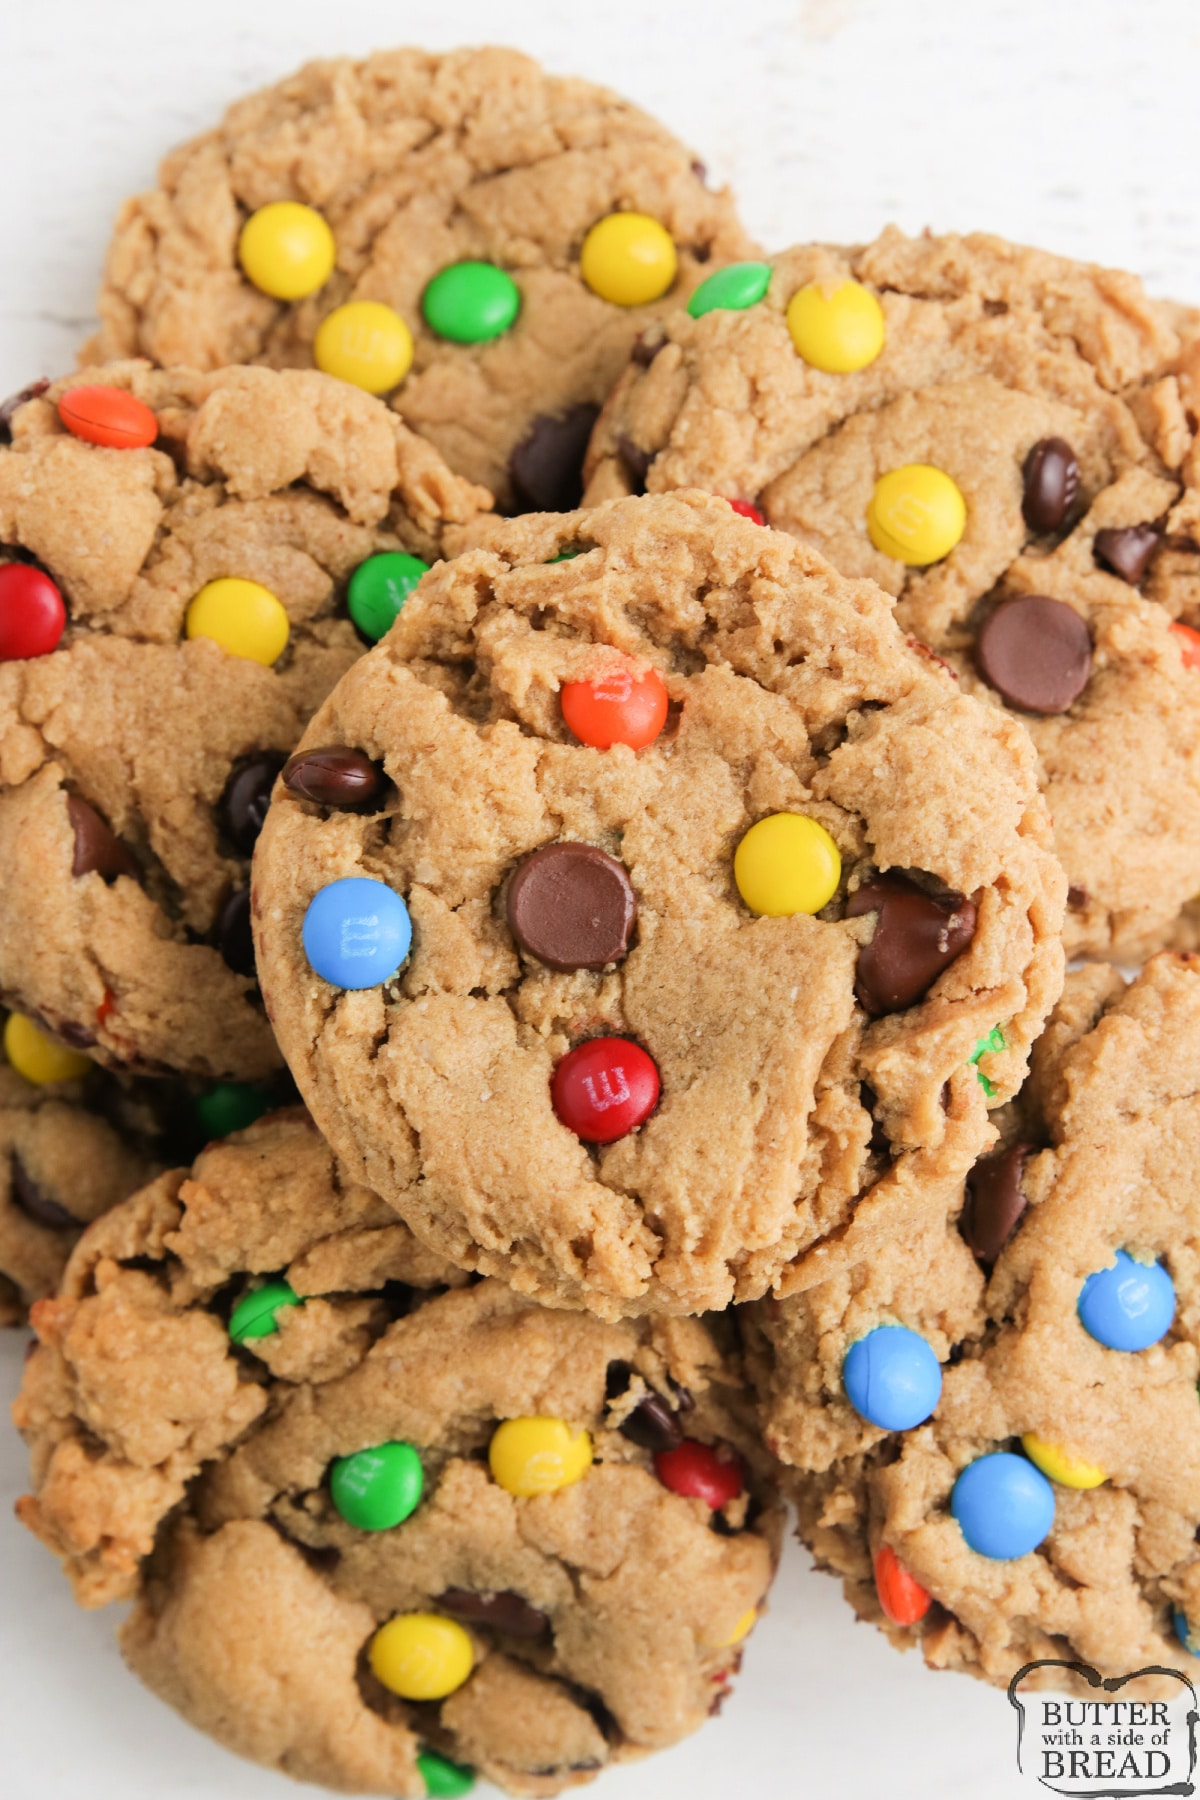 Monster Cookies are chewy, delicious and packed with oats, peanut butter and M&Ms! Naturally gluten free cookies that everyone loves!